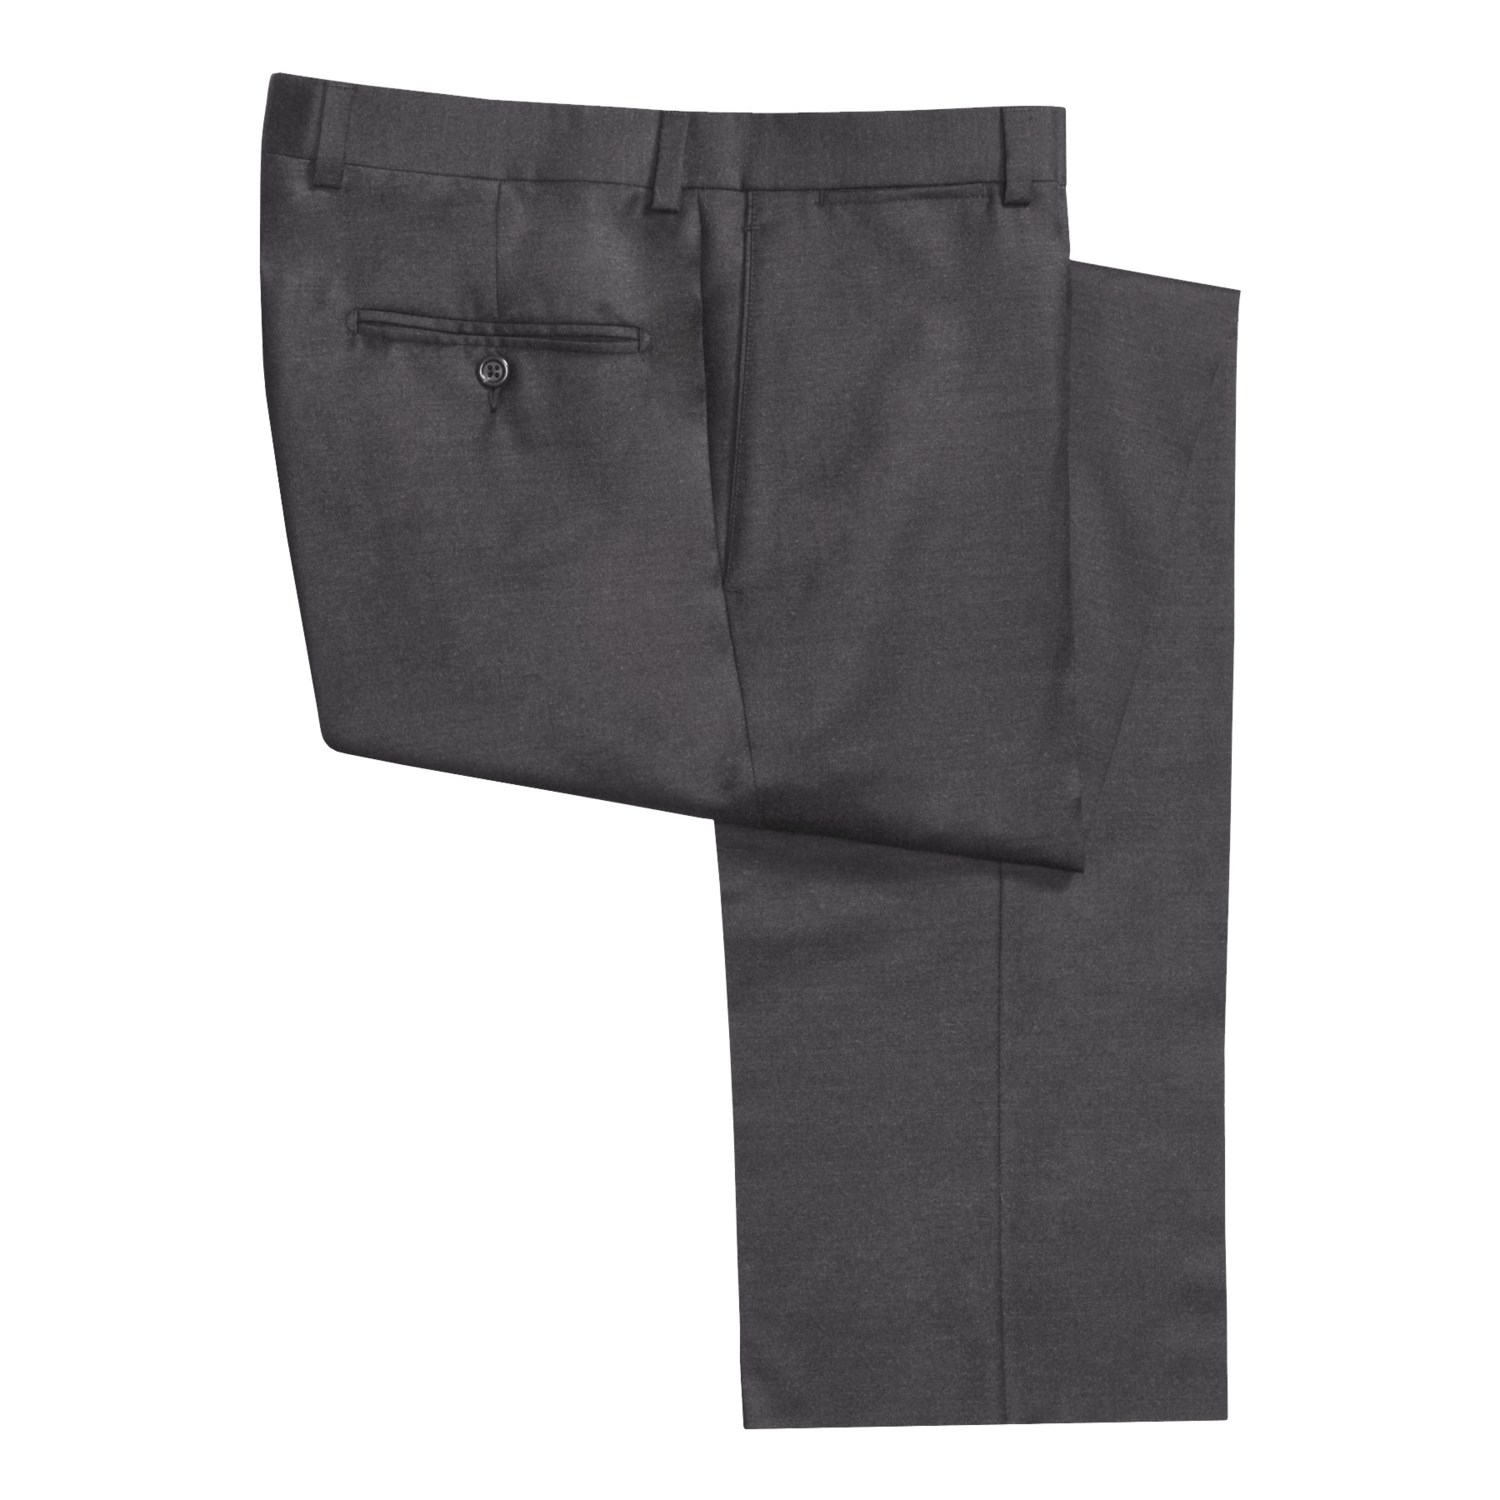 Riviera Worsted Wool Flannel Dress Pants (For Men) 3691A - Save 90%